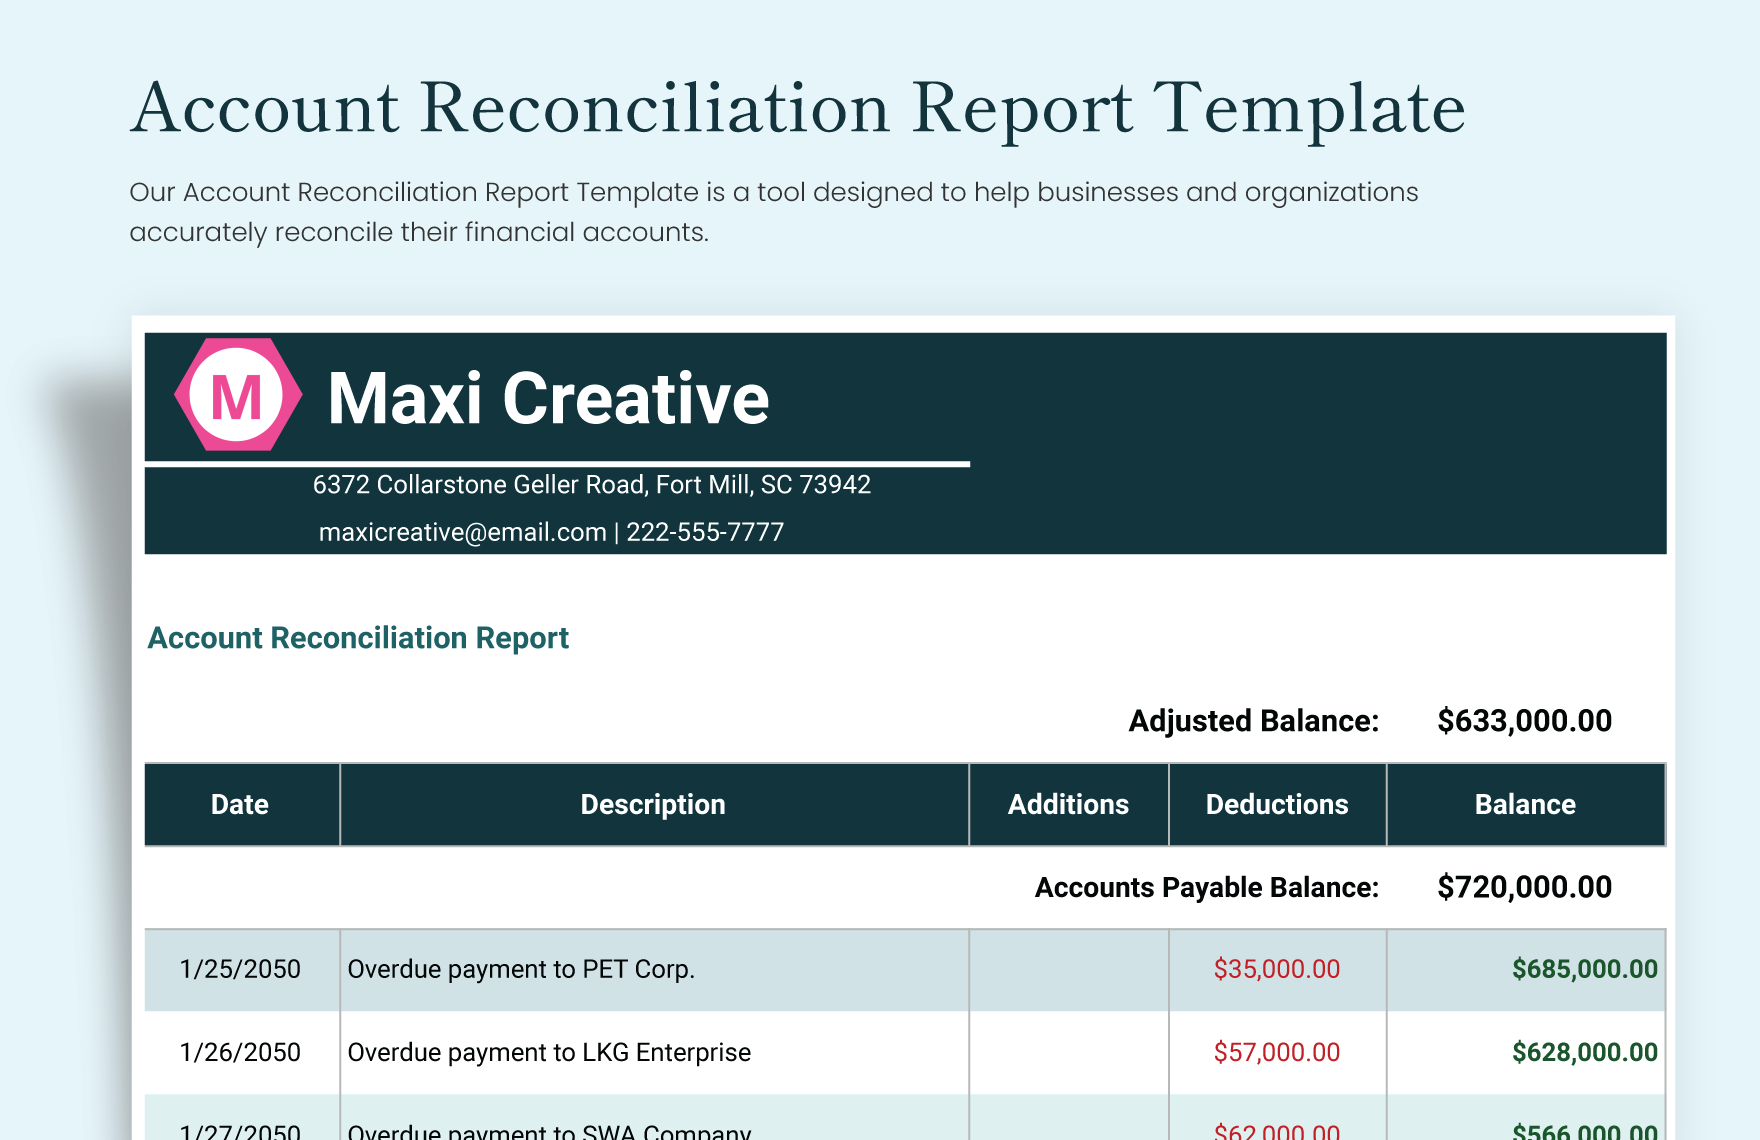 Account Reconciliation Report Template in Excel, Google Sheets